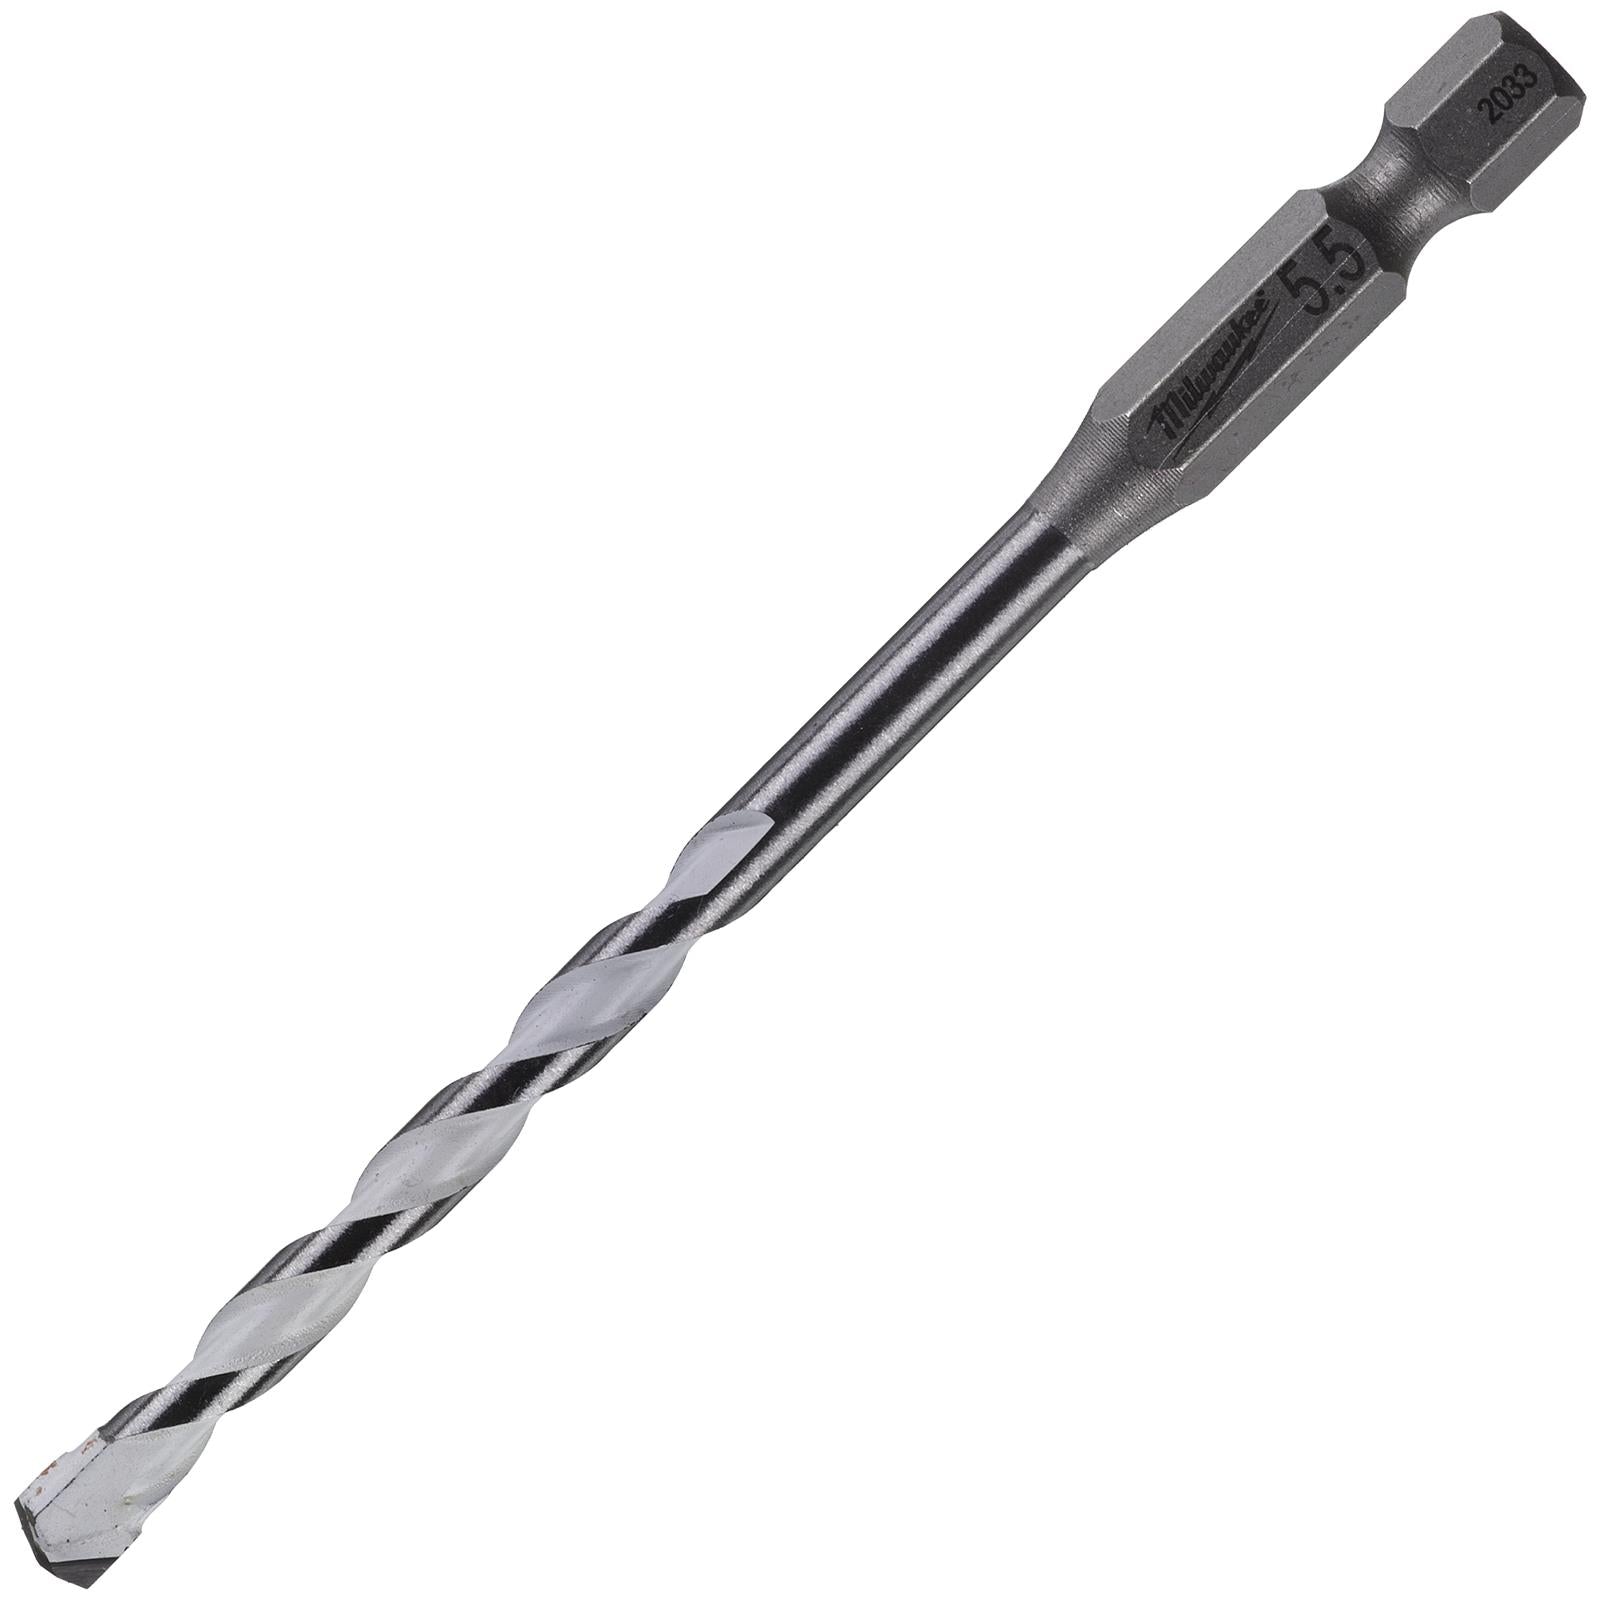 Milwaukee Multi Material Drill Bits Impact Rated TCT for Wood Metal Masonry